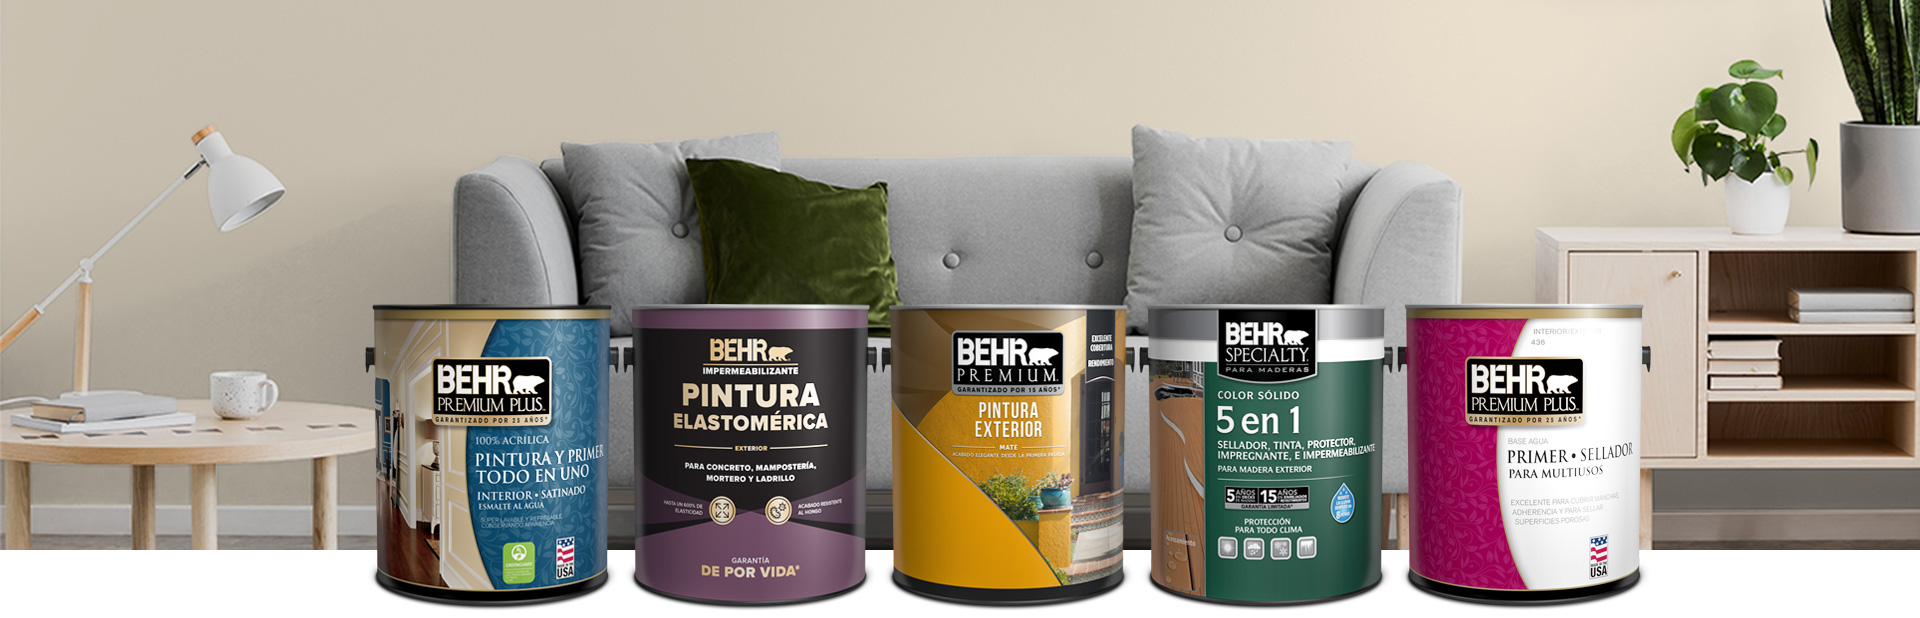 Behr Chile paint cans with color palette in the background